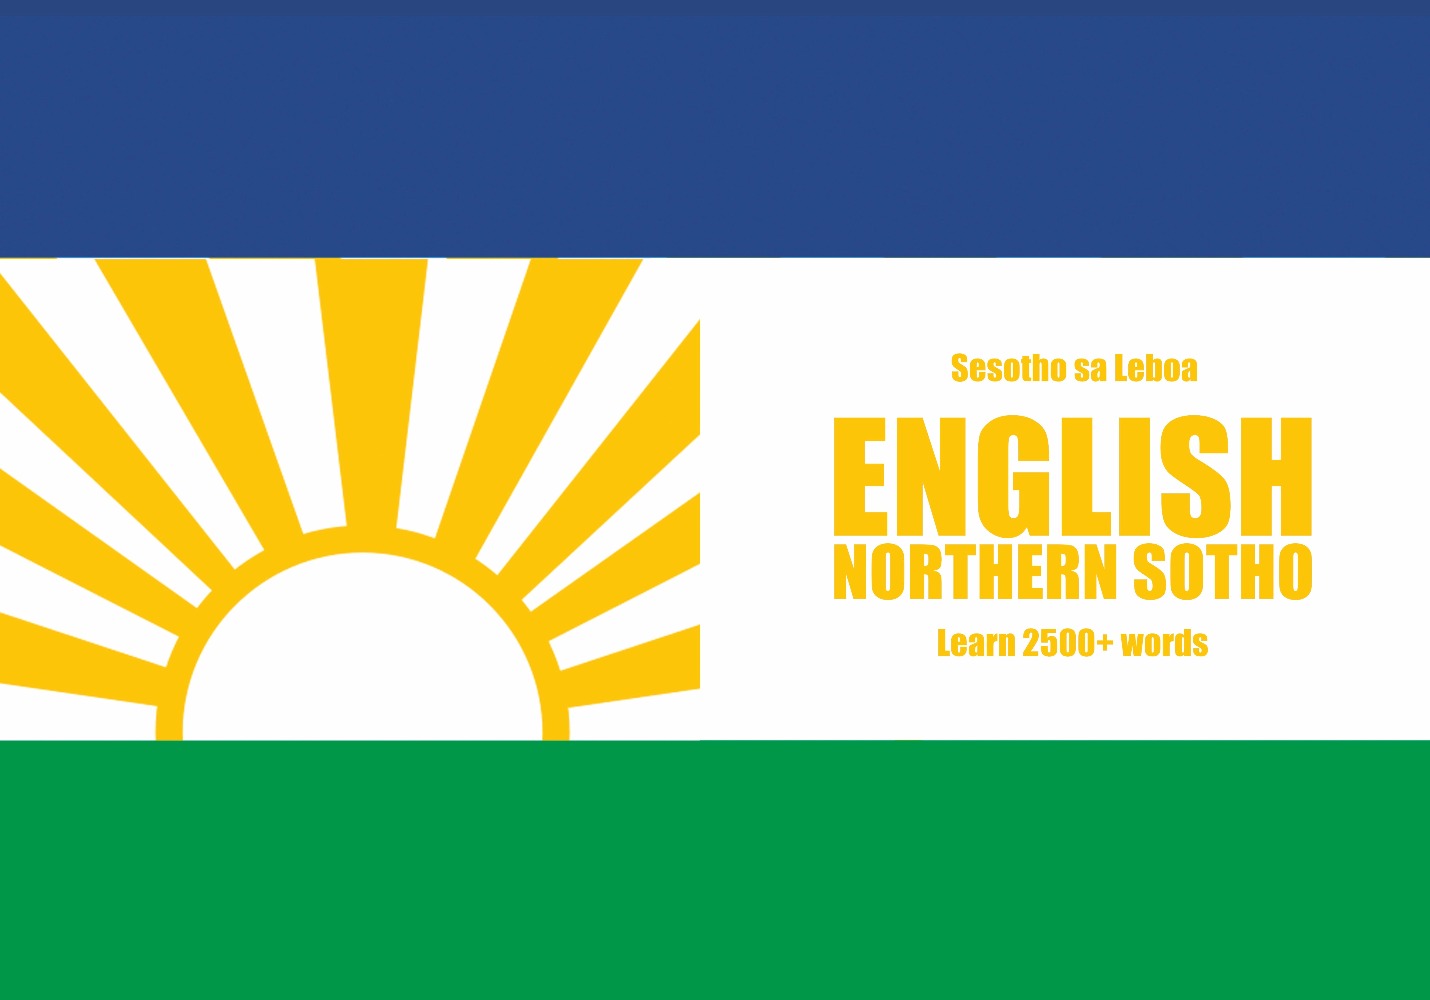 Northern Sotho language learning notebook cover